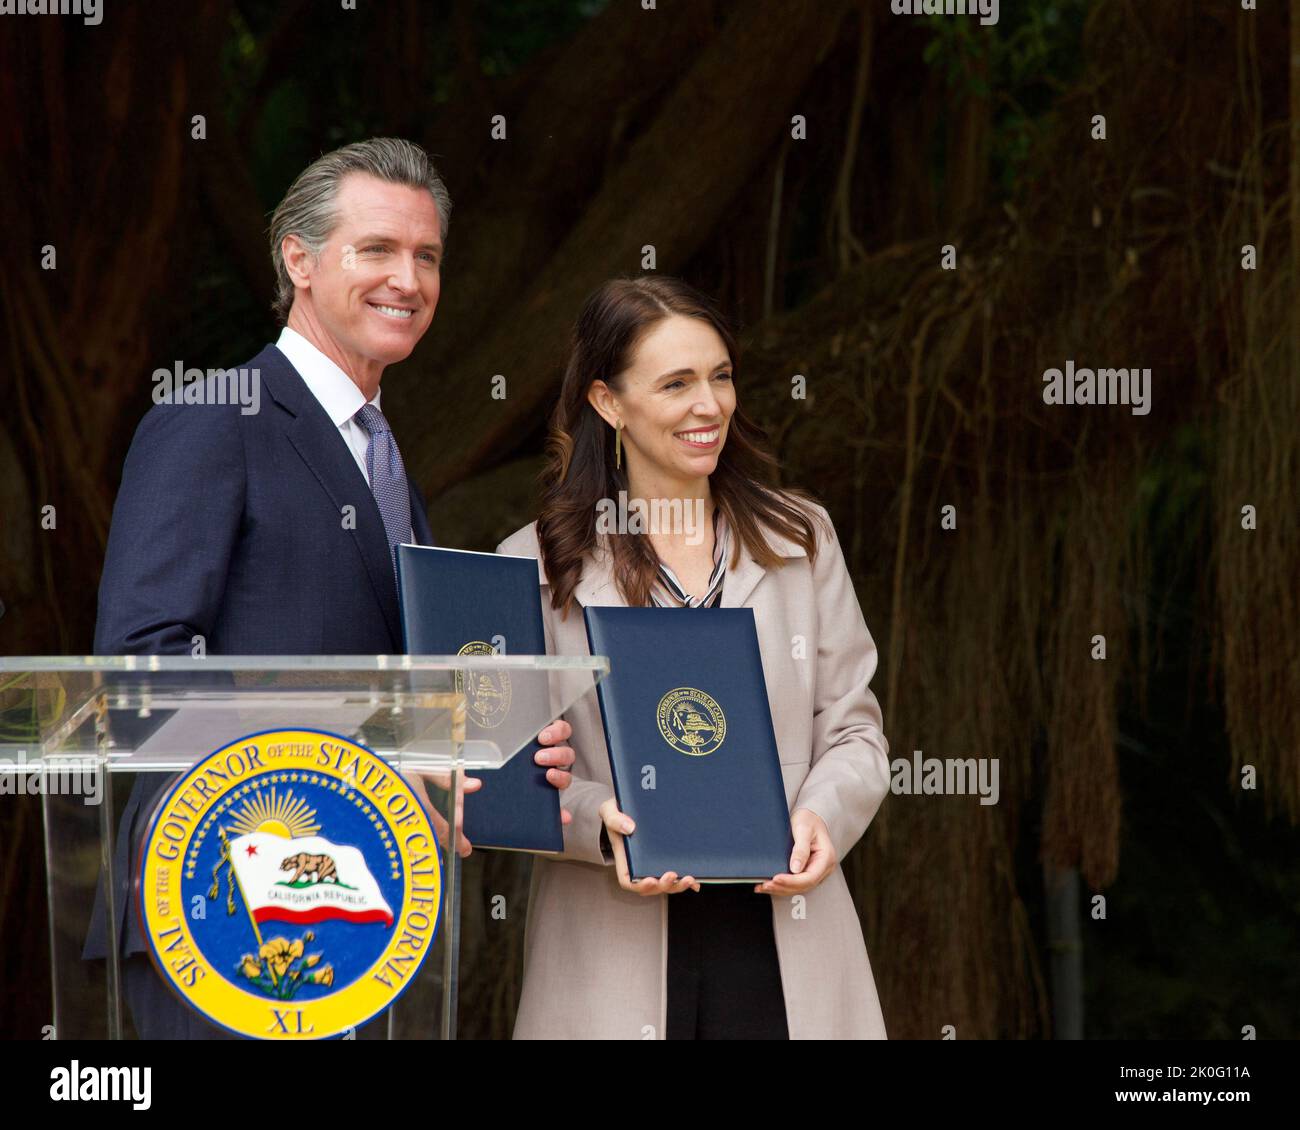 San Francisco, CA - May 27, 2022: Governor Newsome and Prime Minister Jacinda Ardern at the California and New Zealand Partner to Advance Global Clima Stock Photo